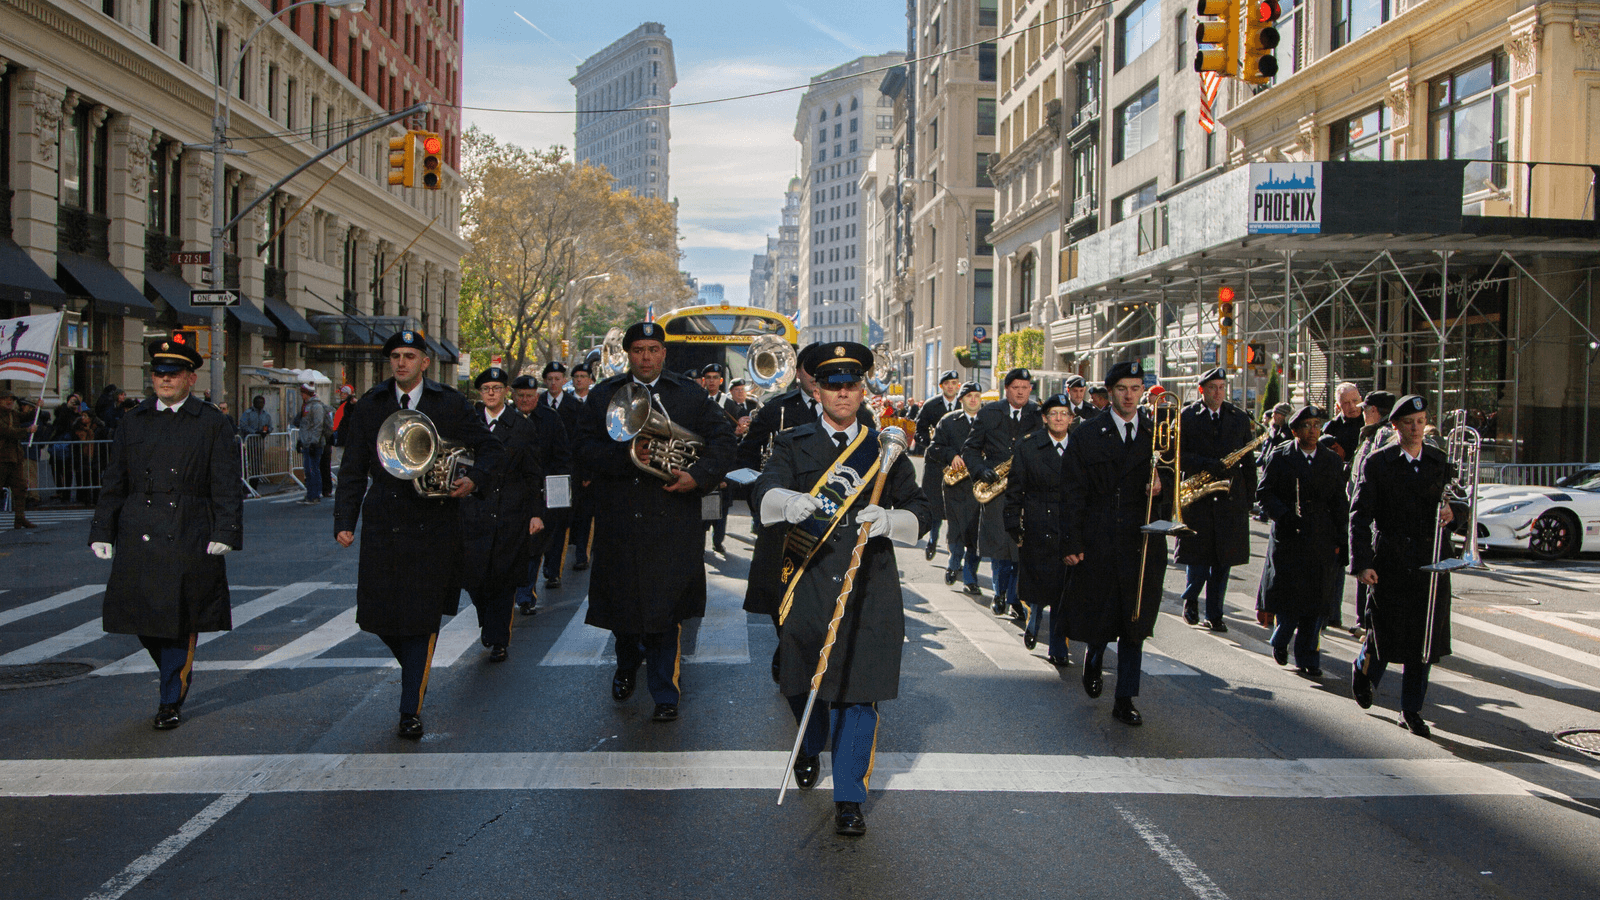 Brian Endlein (C), of the US Army Reserve 78th Army Band, leads the band in marching during the annual New York City Veterans Day Parade in New York, Nov. 11, 2017.